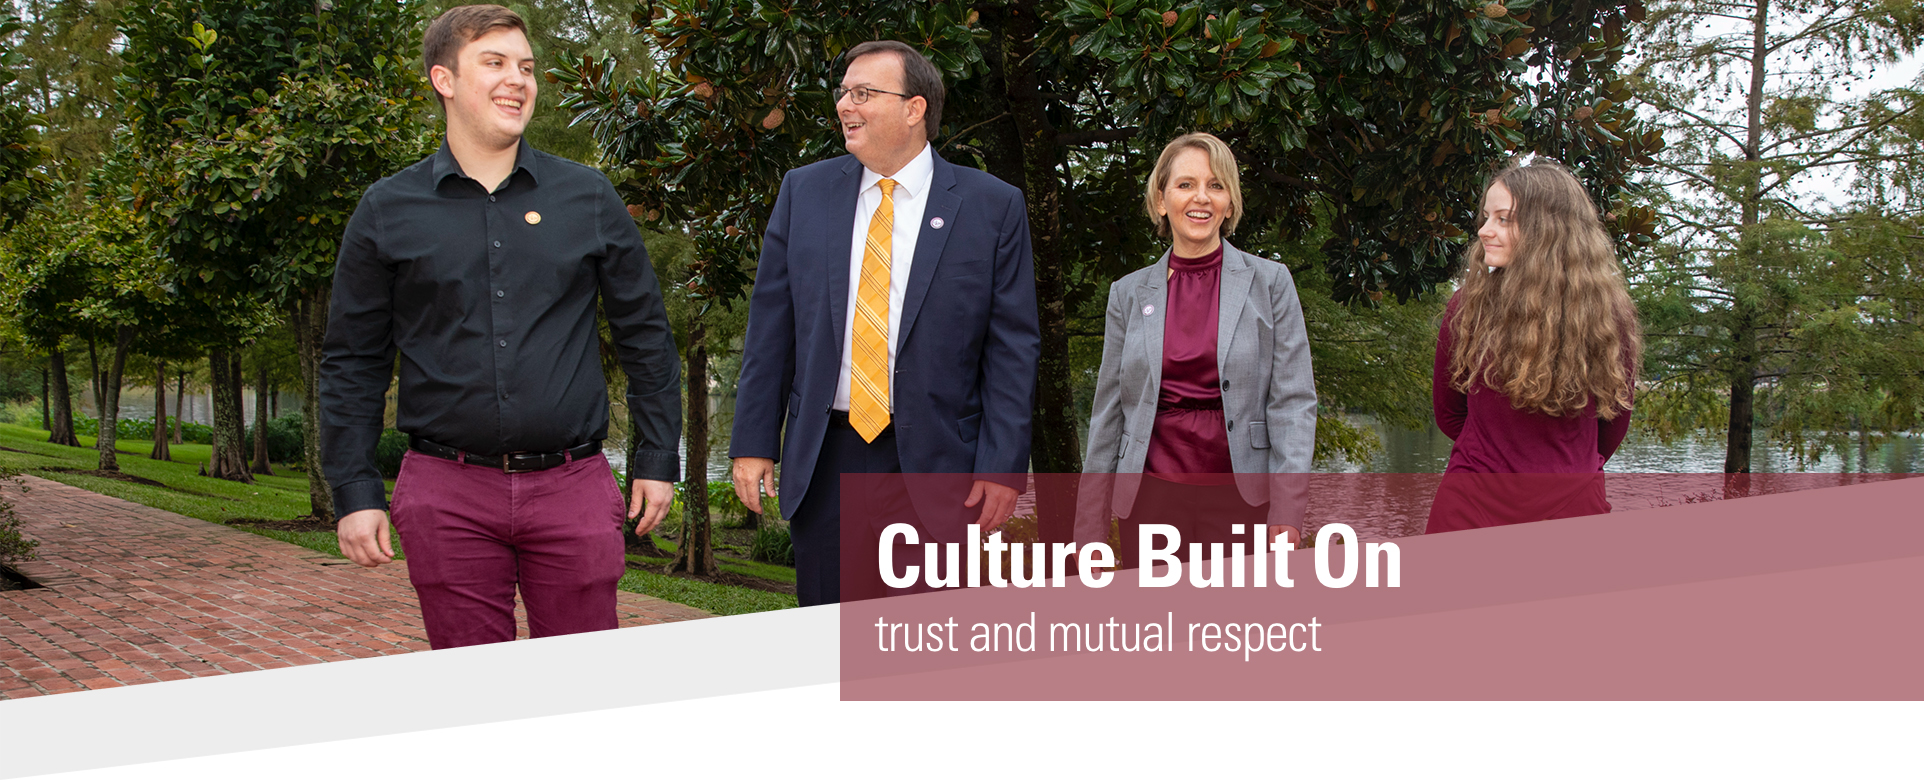 Culture Built On trust and mutual respect